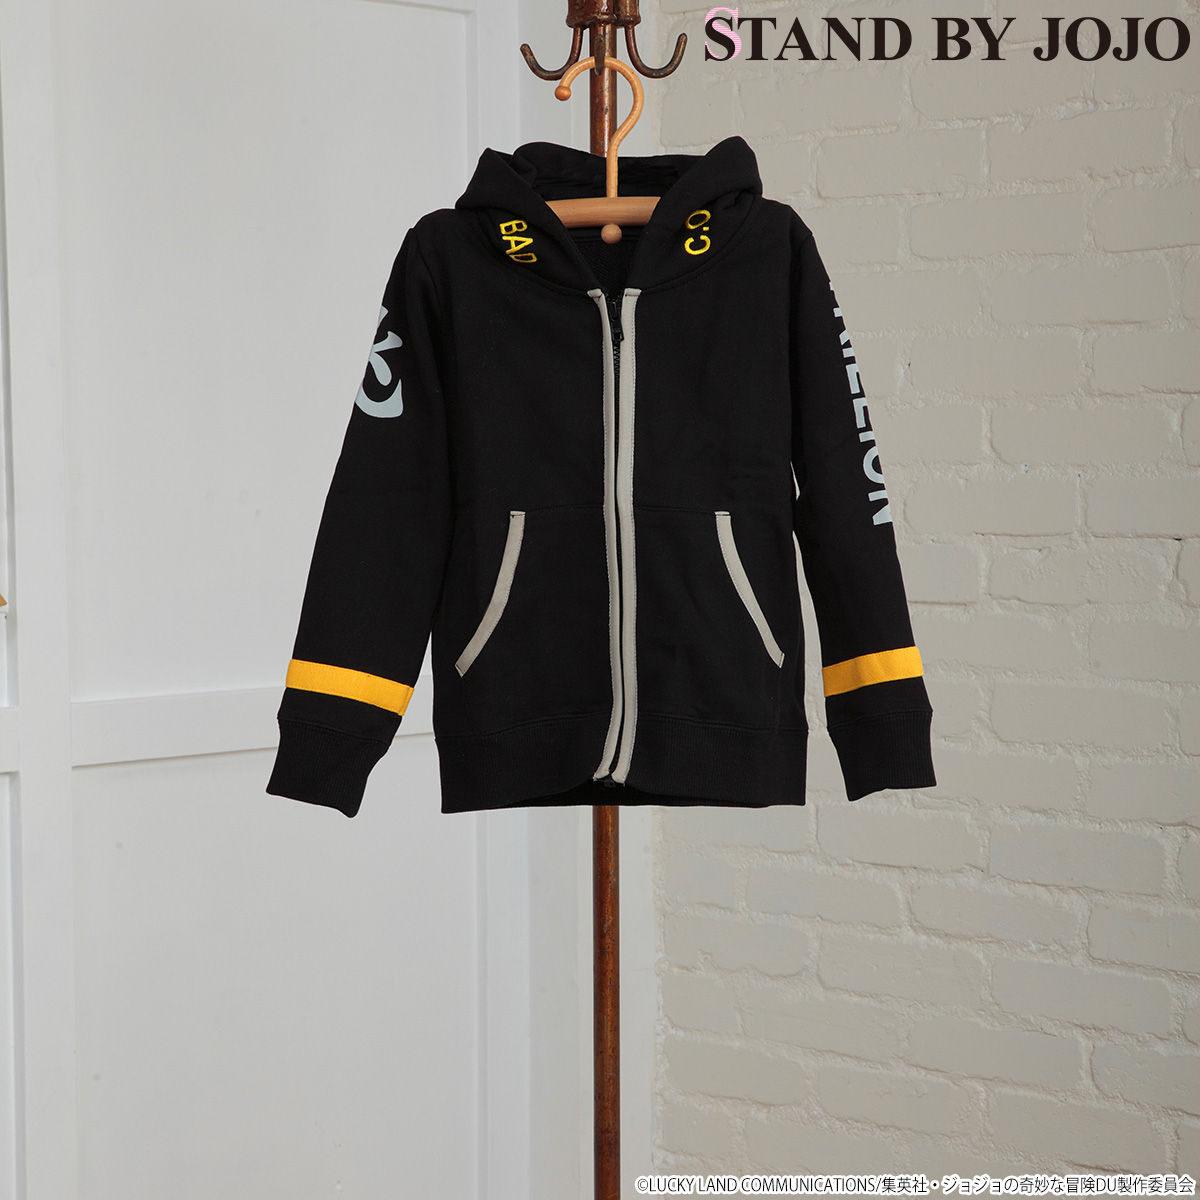 Stand By Jojo ジョジョの奇妙な冒険 虹村形兆 パーカー キッズサイズ ジョジョの奇妙な冒険 趣味 コレクション バンダイナムコグループ公式通販サイト